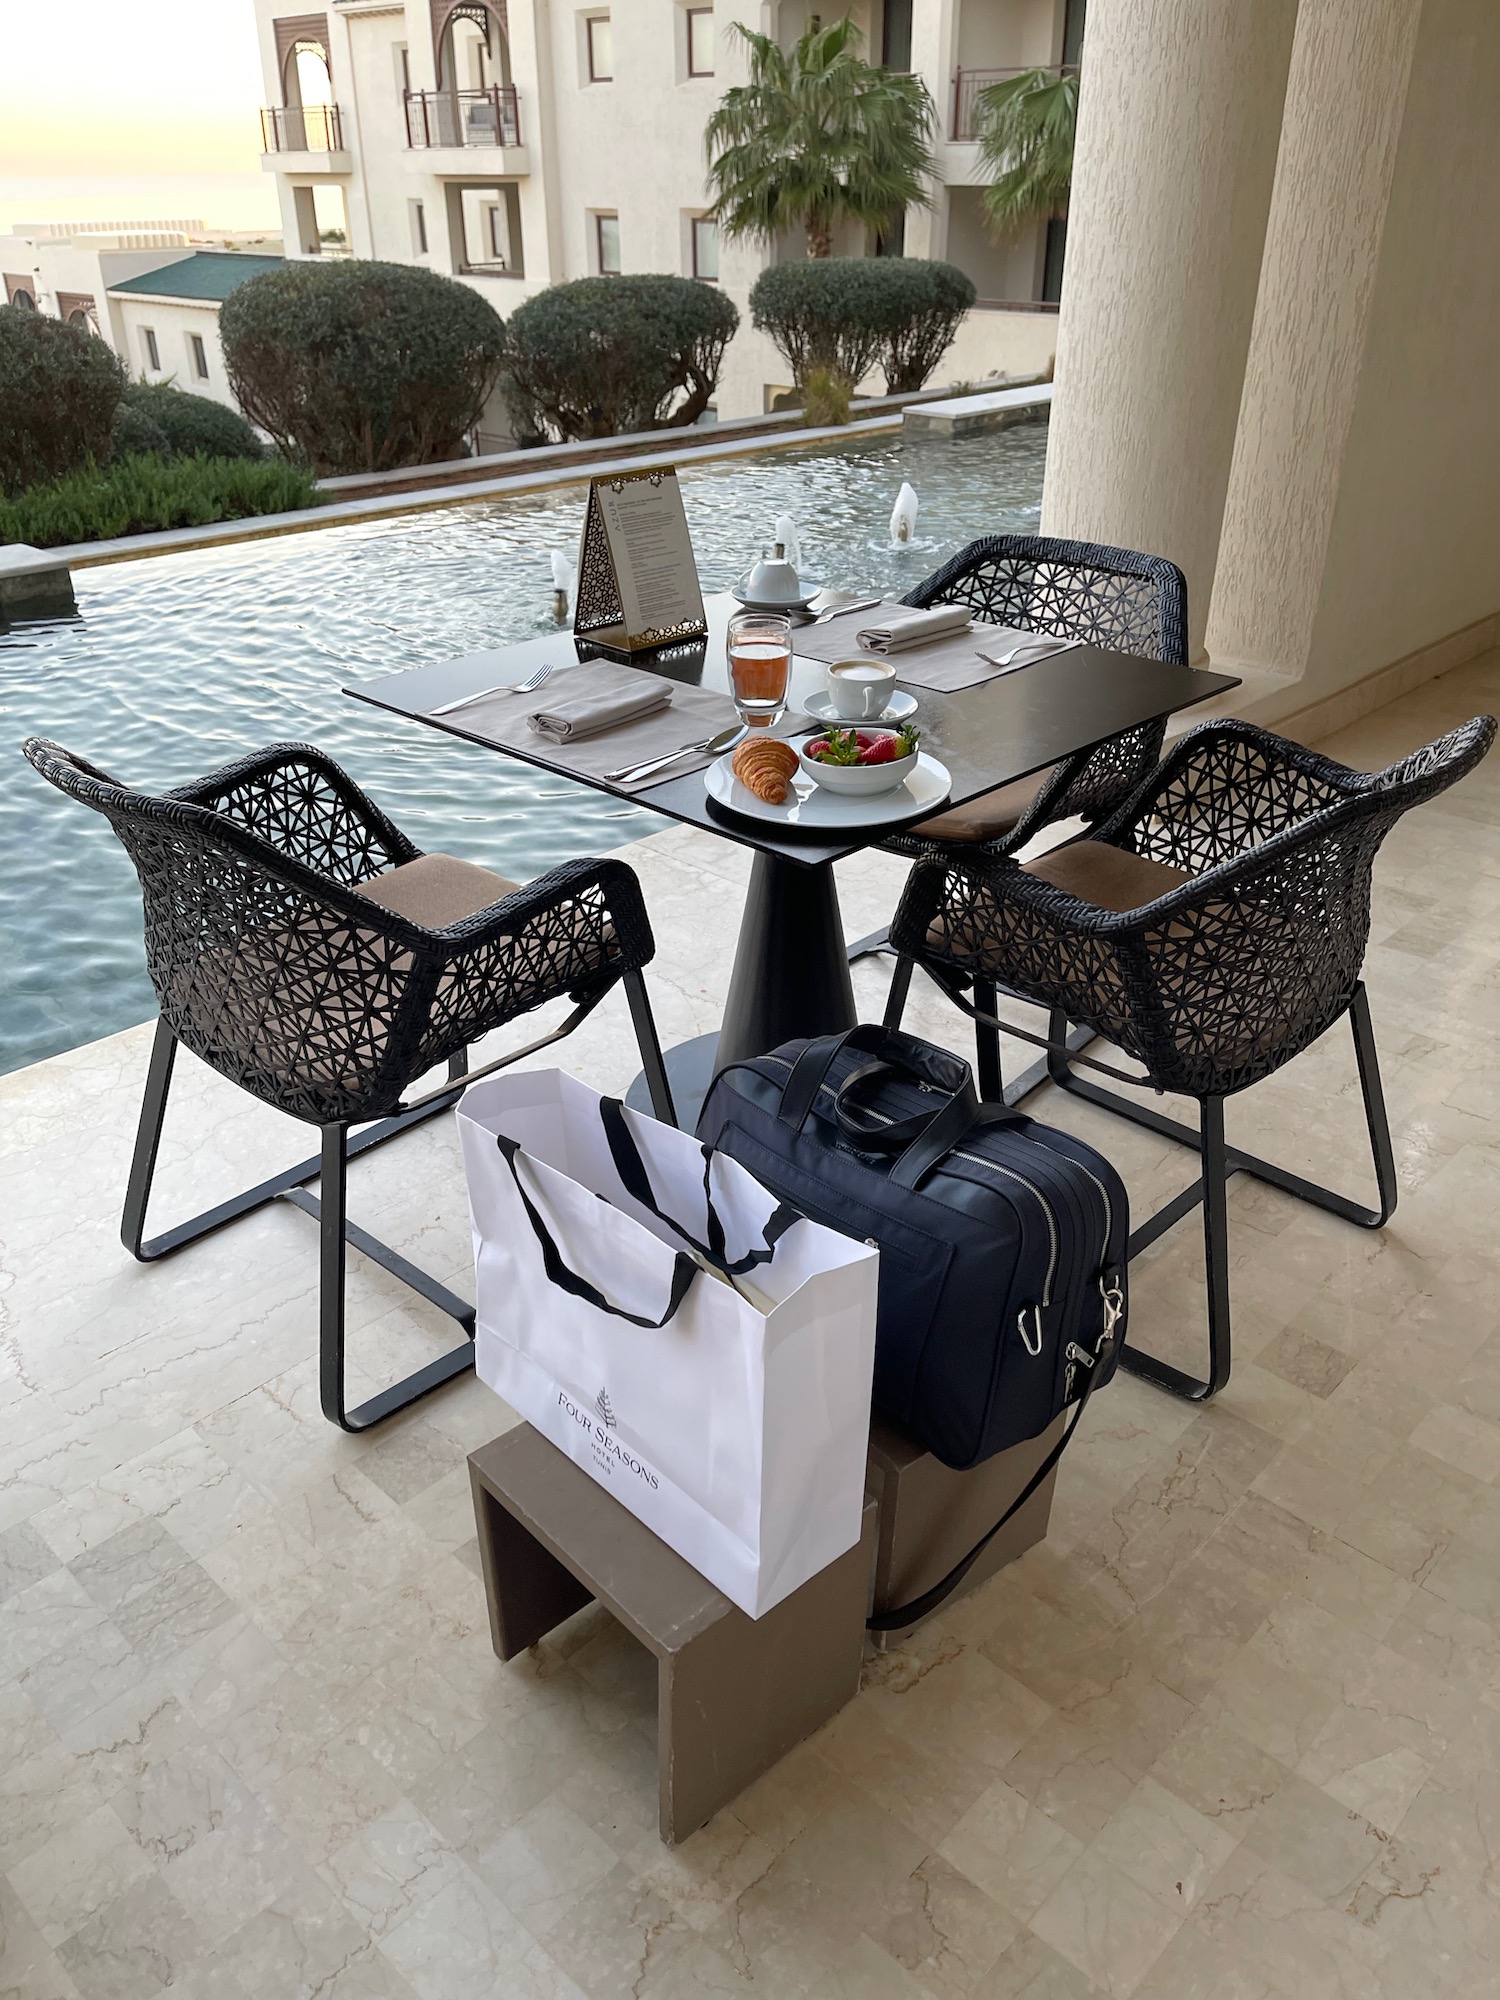 a table and chairs with food and luggage on a patio